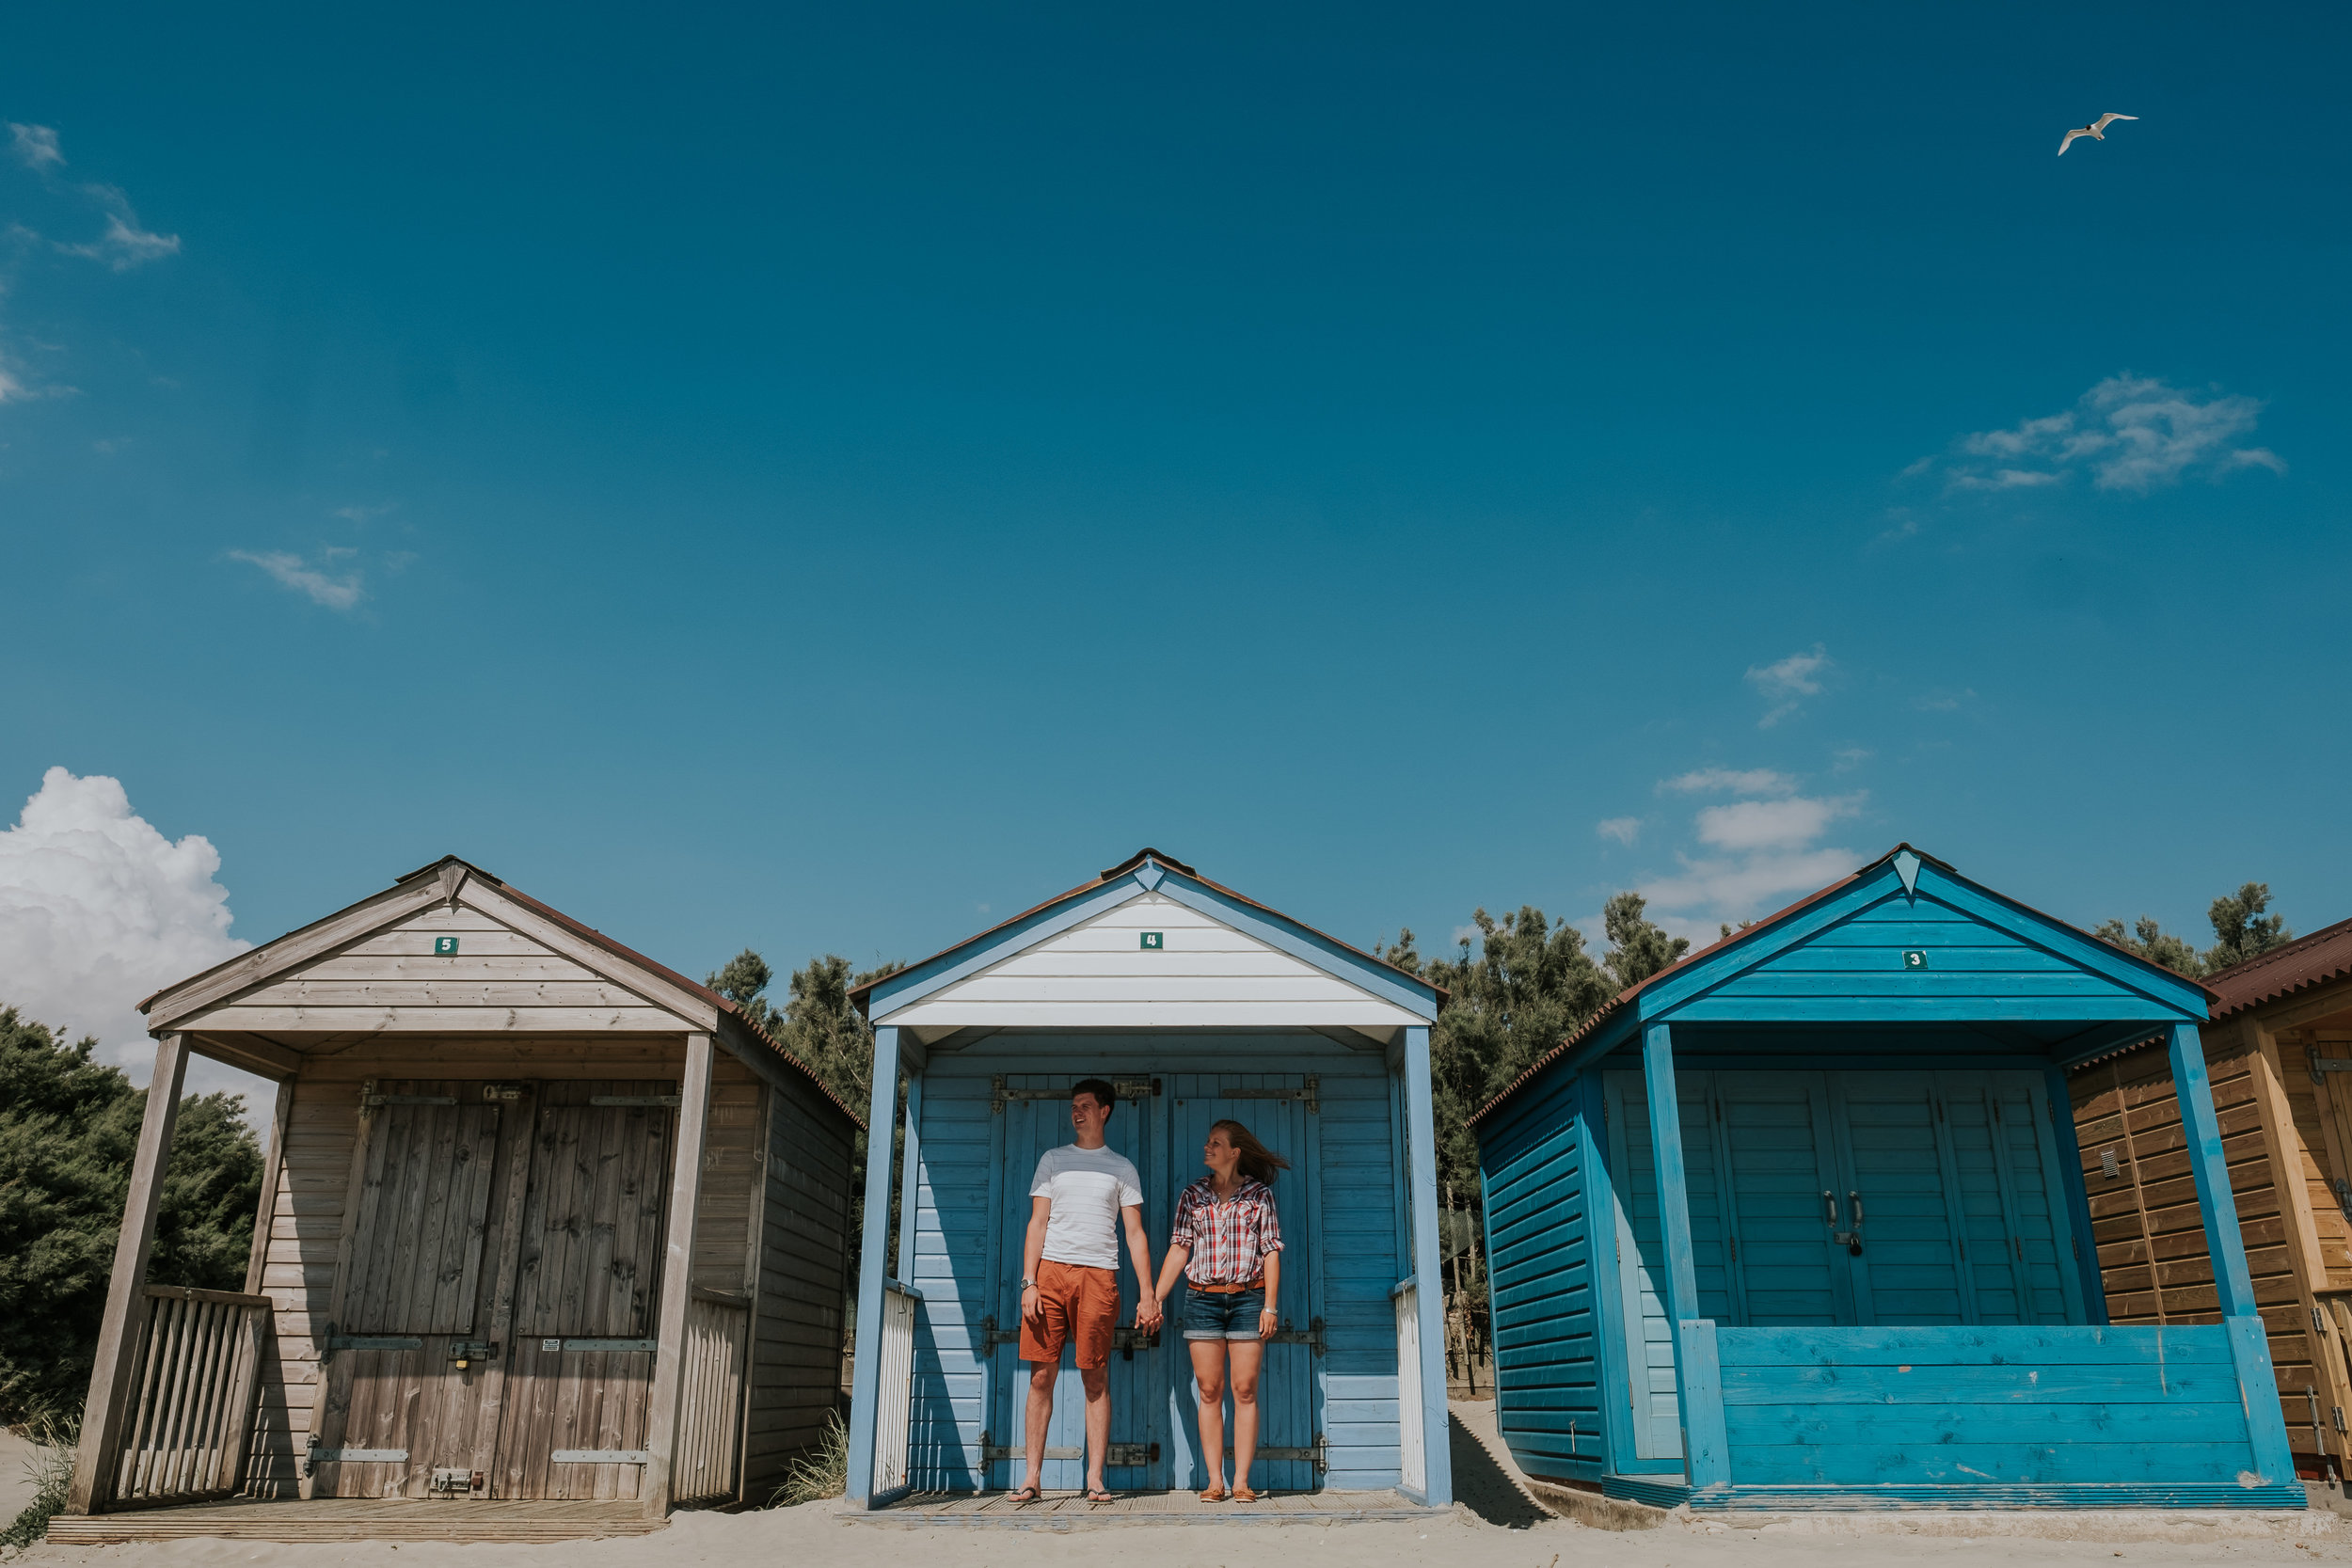 West Wittering Engagement Shoot Sussex Wedding Photographer Southend Barns Joanna Nicole Photography Cool Creative Fun Alternative 18.jpg